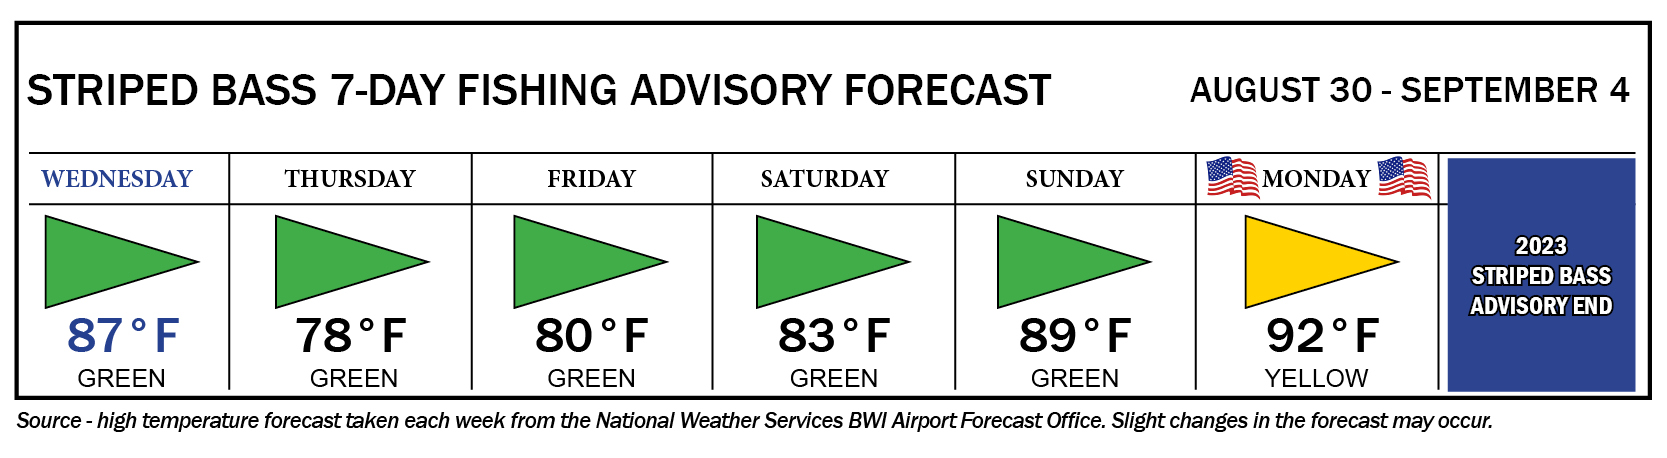 Image of Striped Bass 7-Day Fishing Advisory Forecast, showing yellow flag days Wednesday through Friday, and Tuesday; and green flag days Saturday through Monday